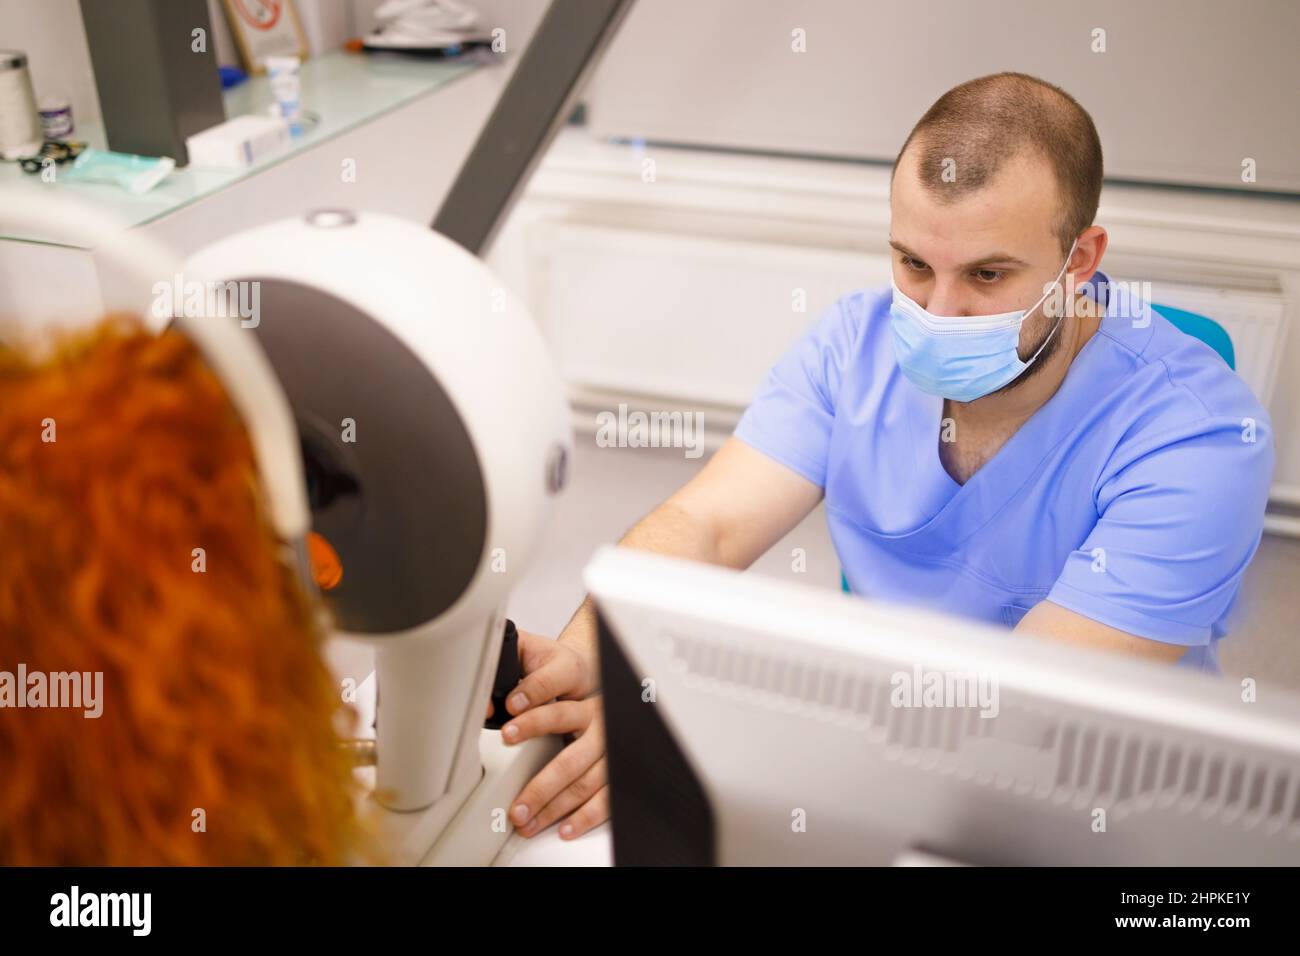 Male technician with a face-mask operating equipment that examines the eyes of a female customer Stock Photo